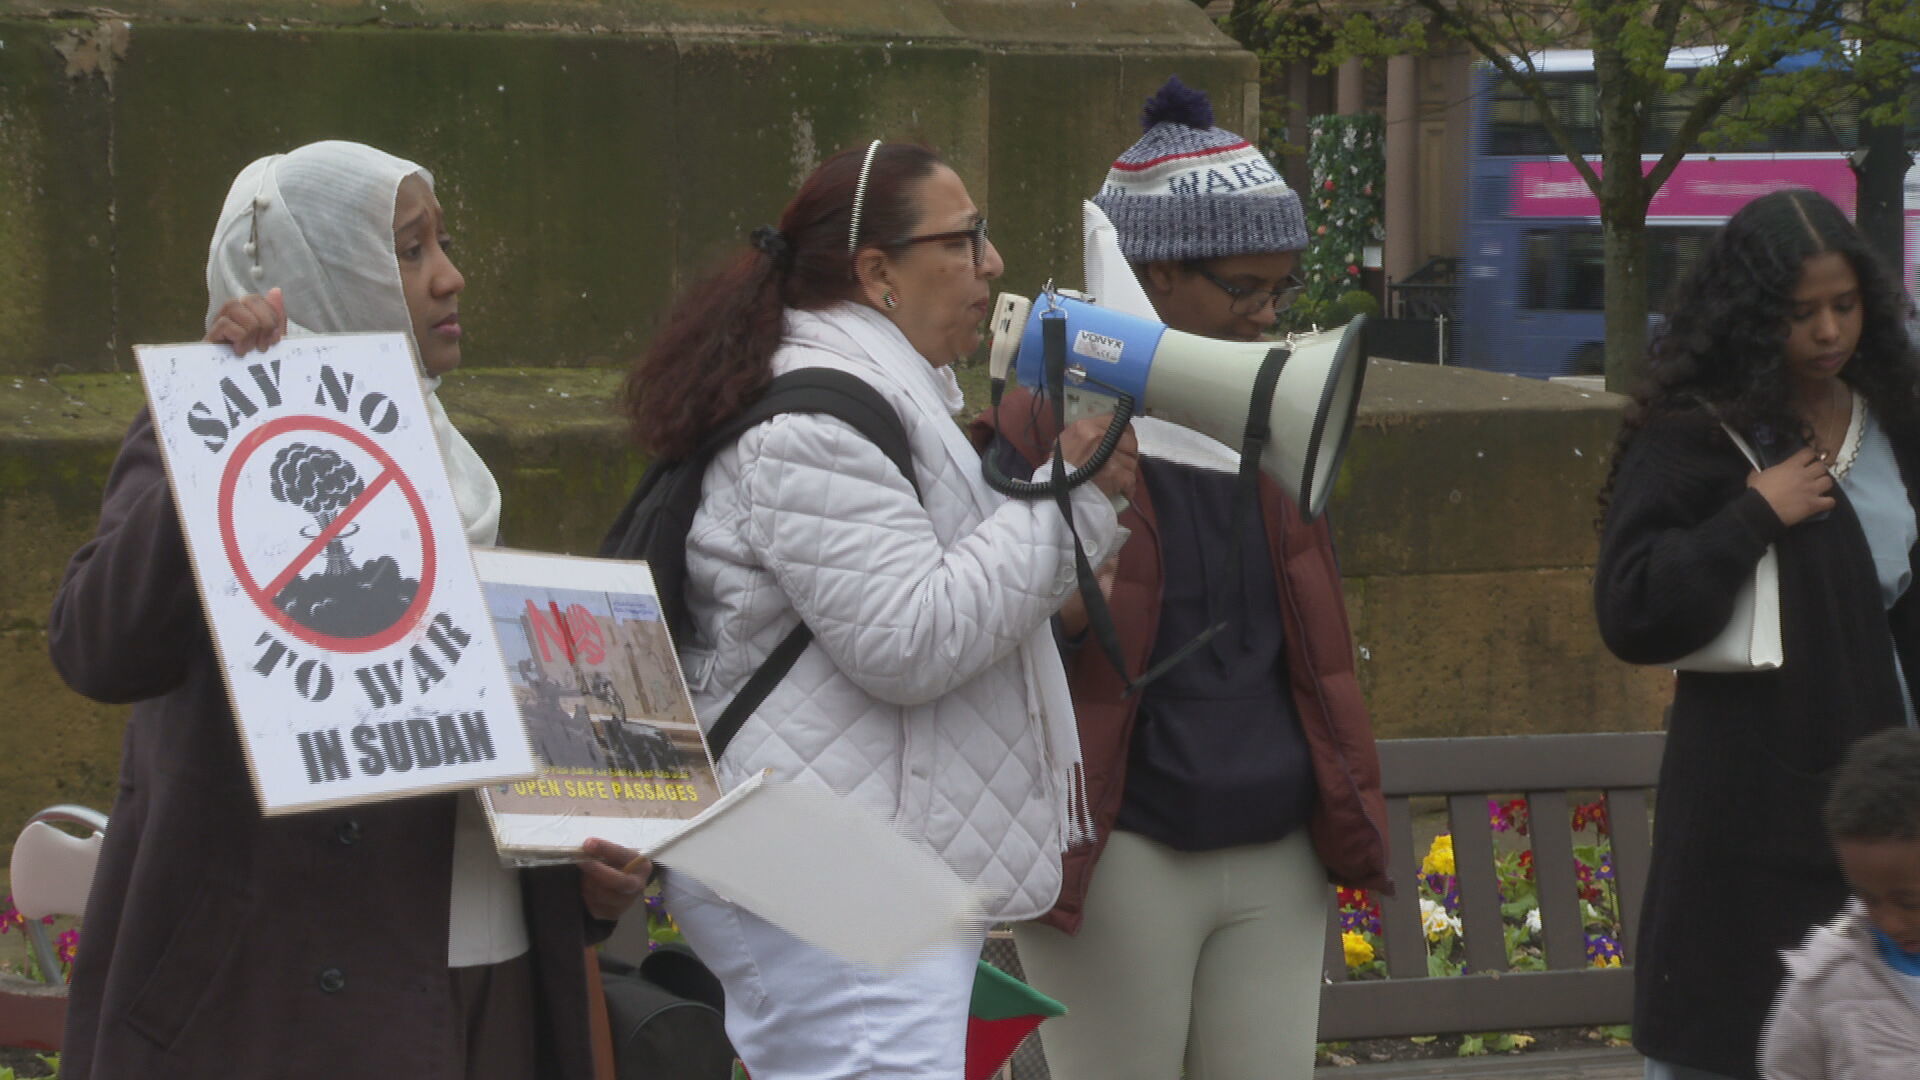 Protesters in Glasgow called for an end to the war in Sudan, which has claimed more than 400 lives.